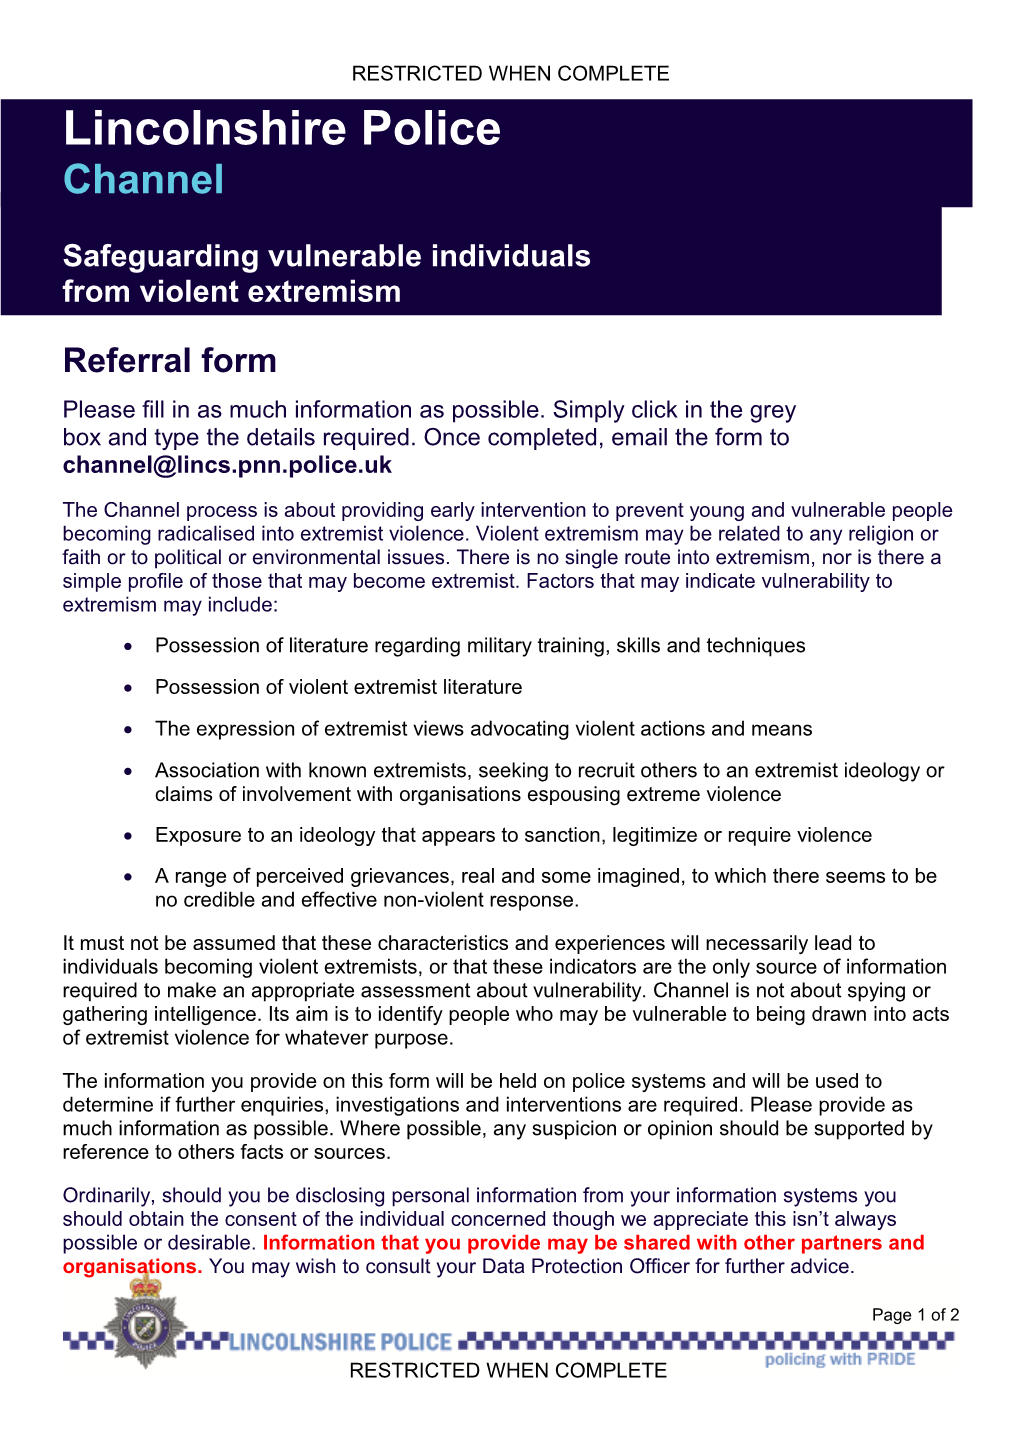 Safeguarding Vulnerable Individuals from Violent Extremism